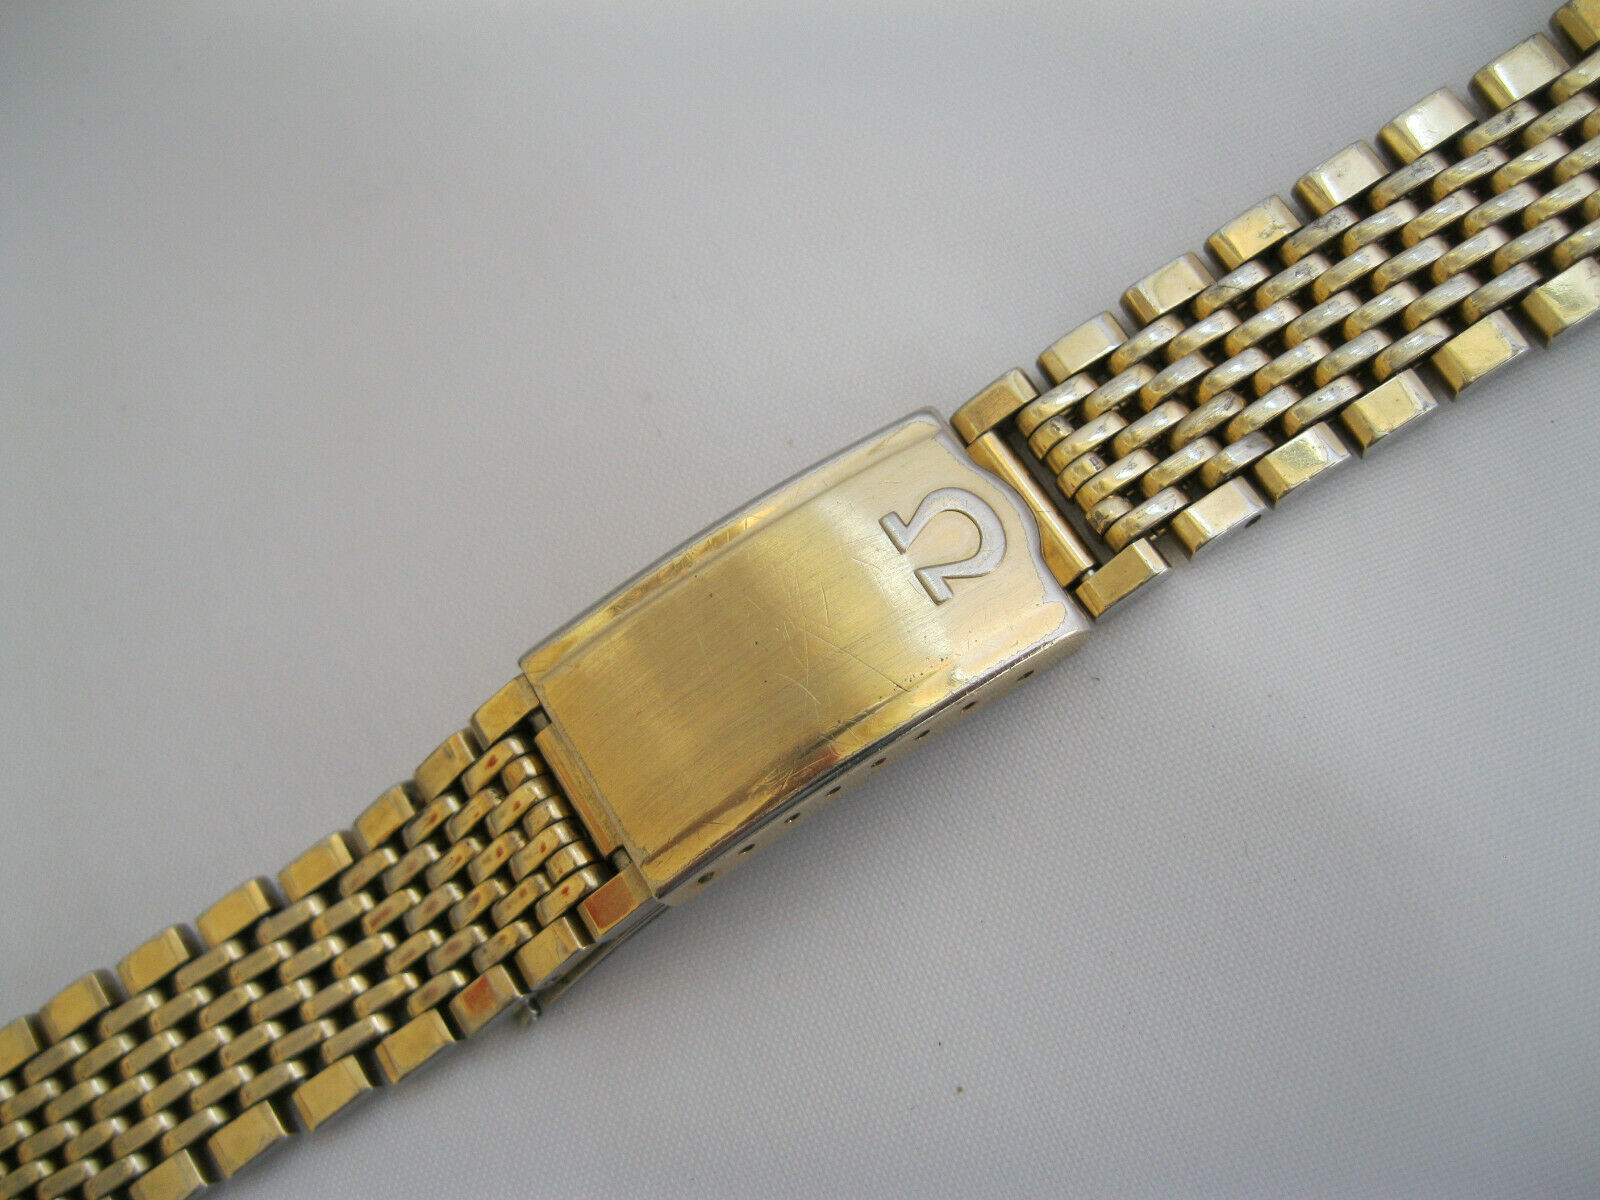 Gold Beads of Rice Watch Band 